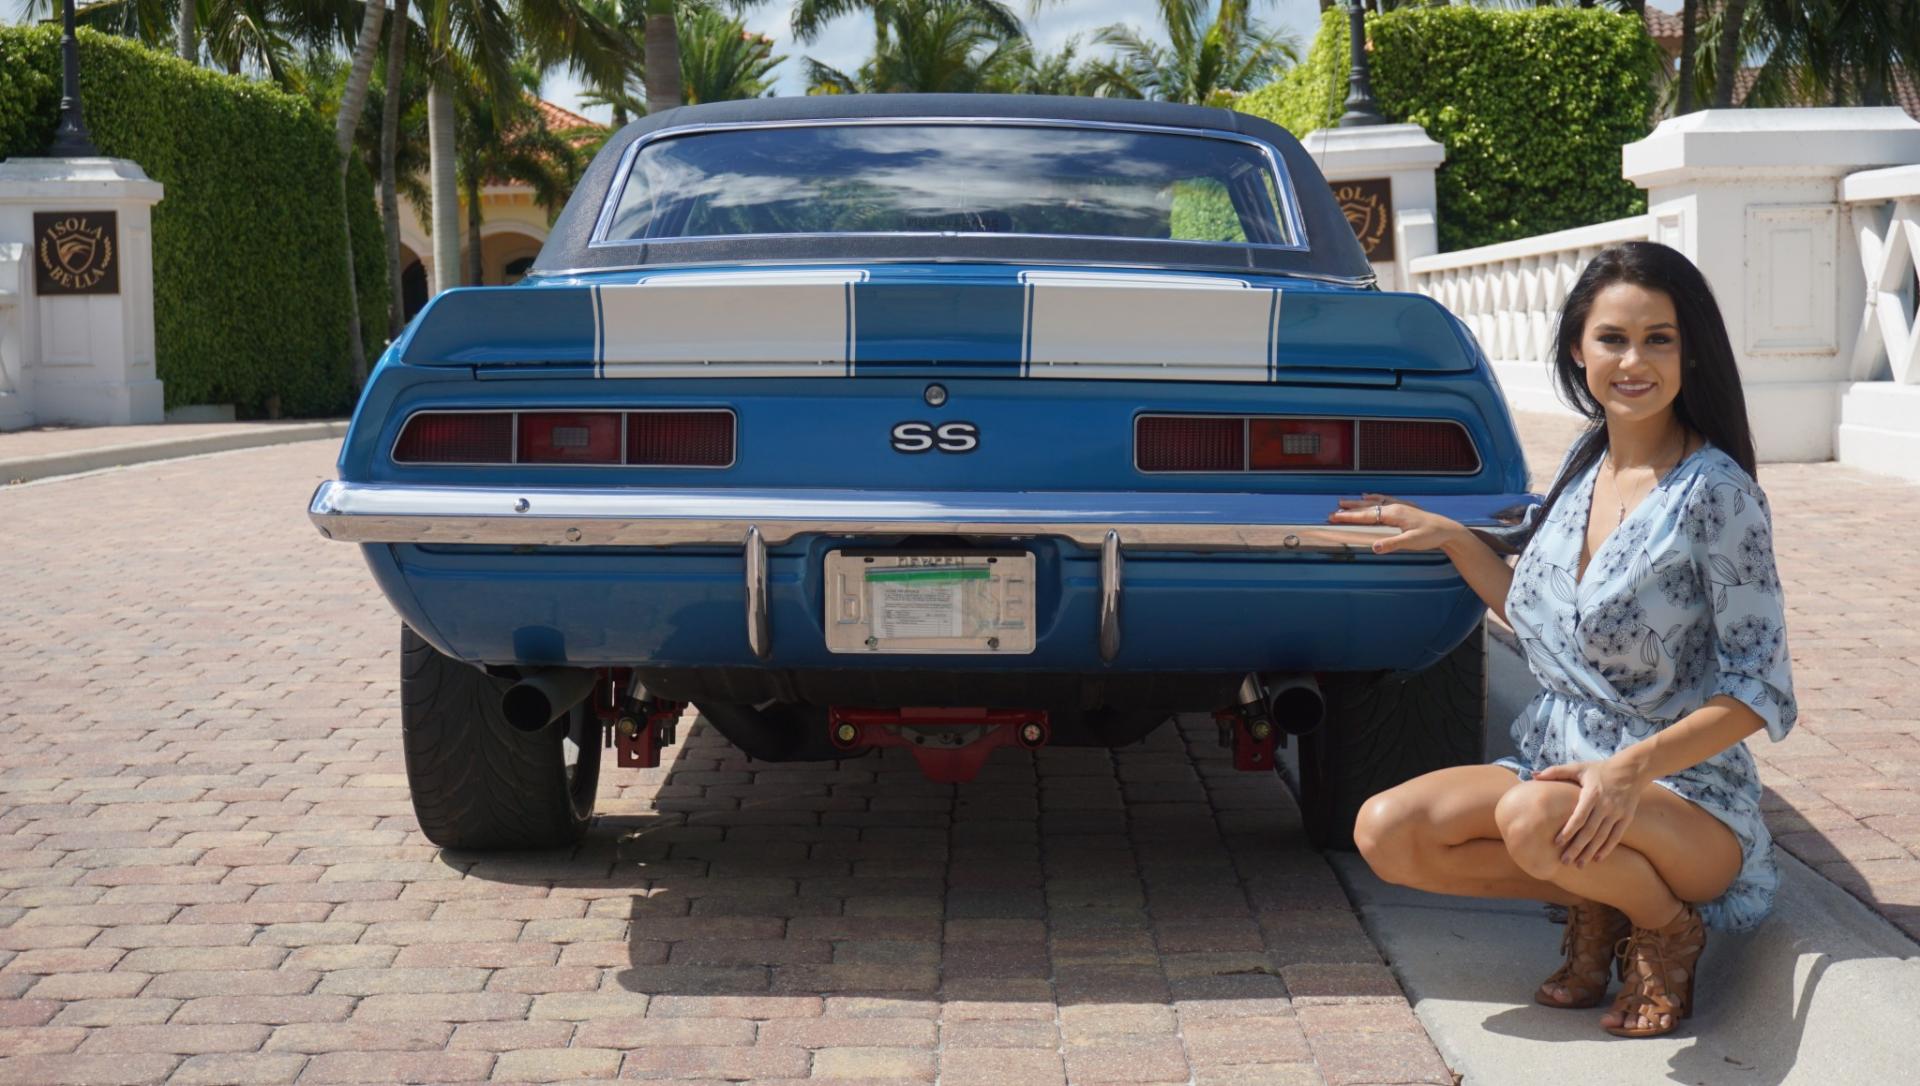 Used 1969 Chevrolet Camaro For Sale ($42,000) | Muscle Cars for Sale